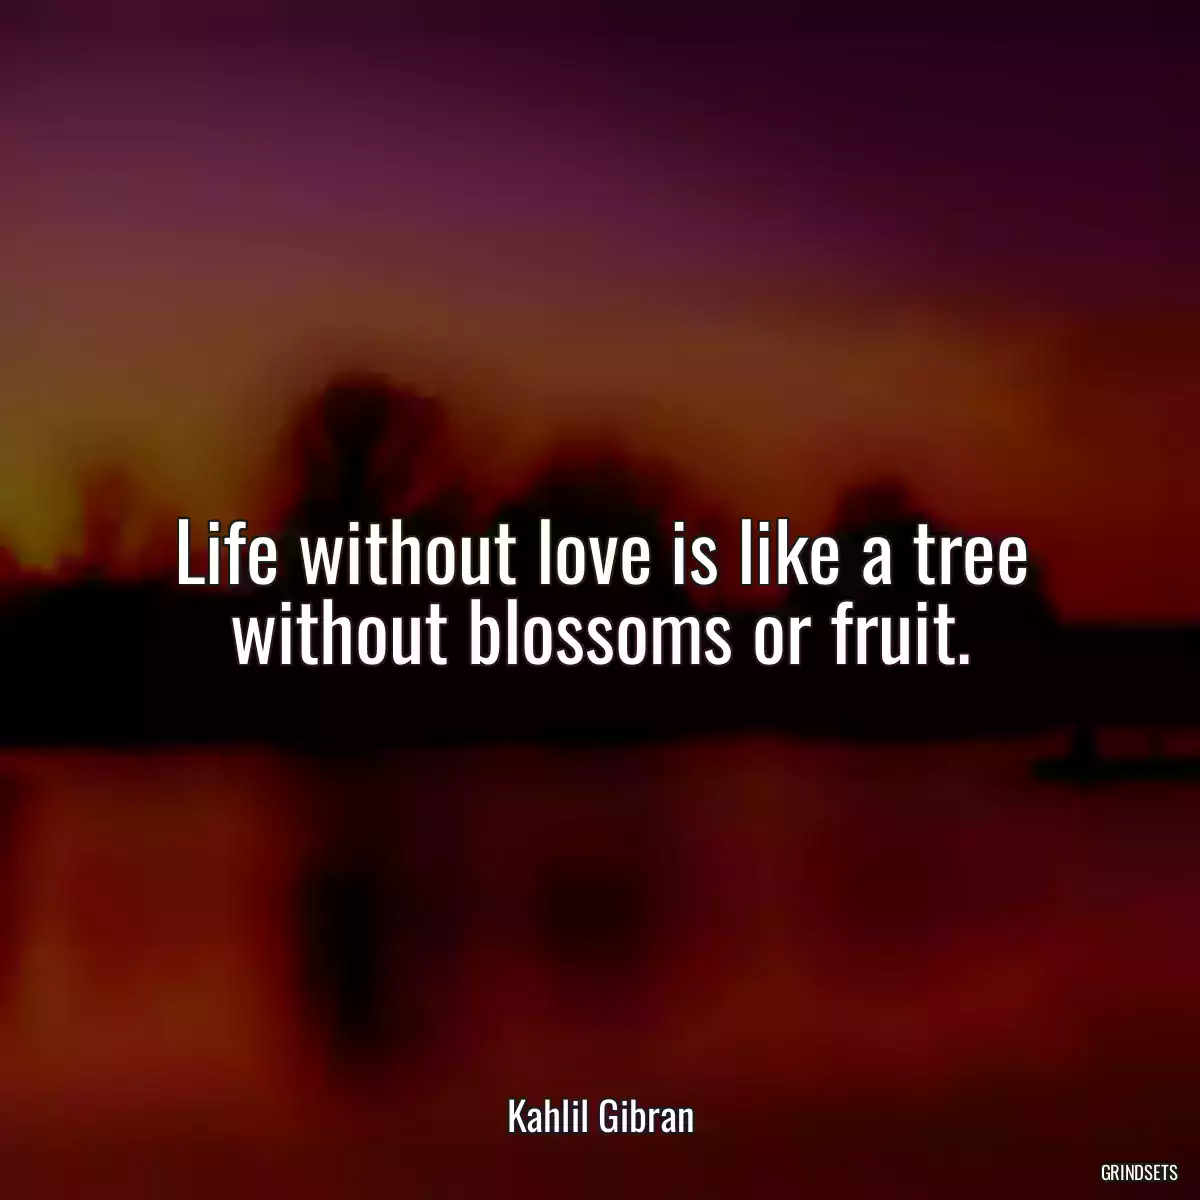 Life without love is like a tree without blossoms or fruit.